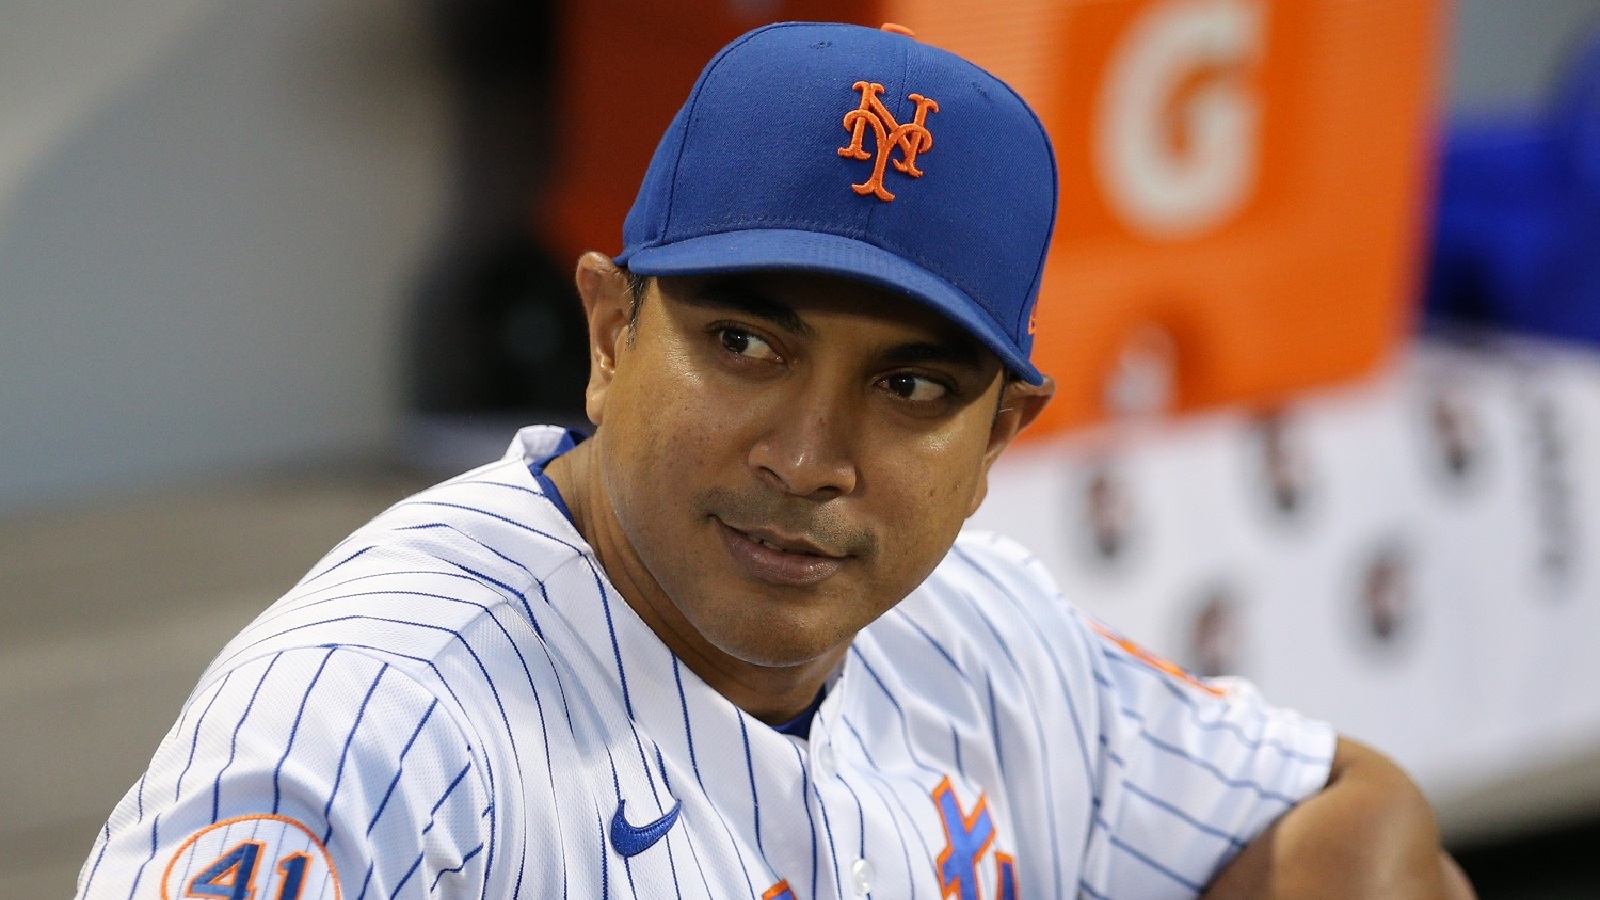 Mets pick coach Luis Rojas to replace Beltrán as manager